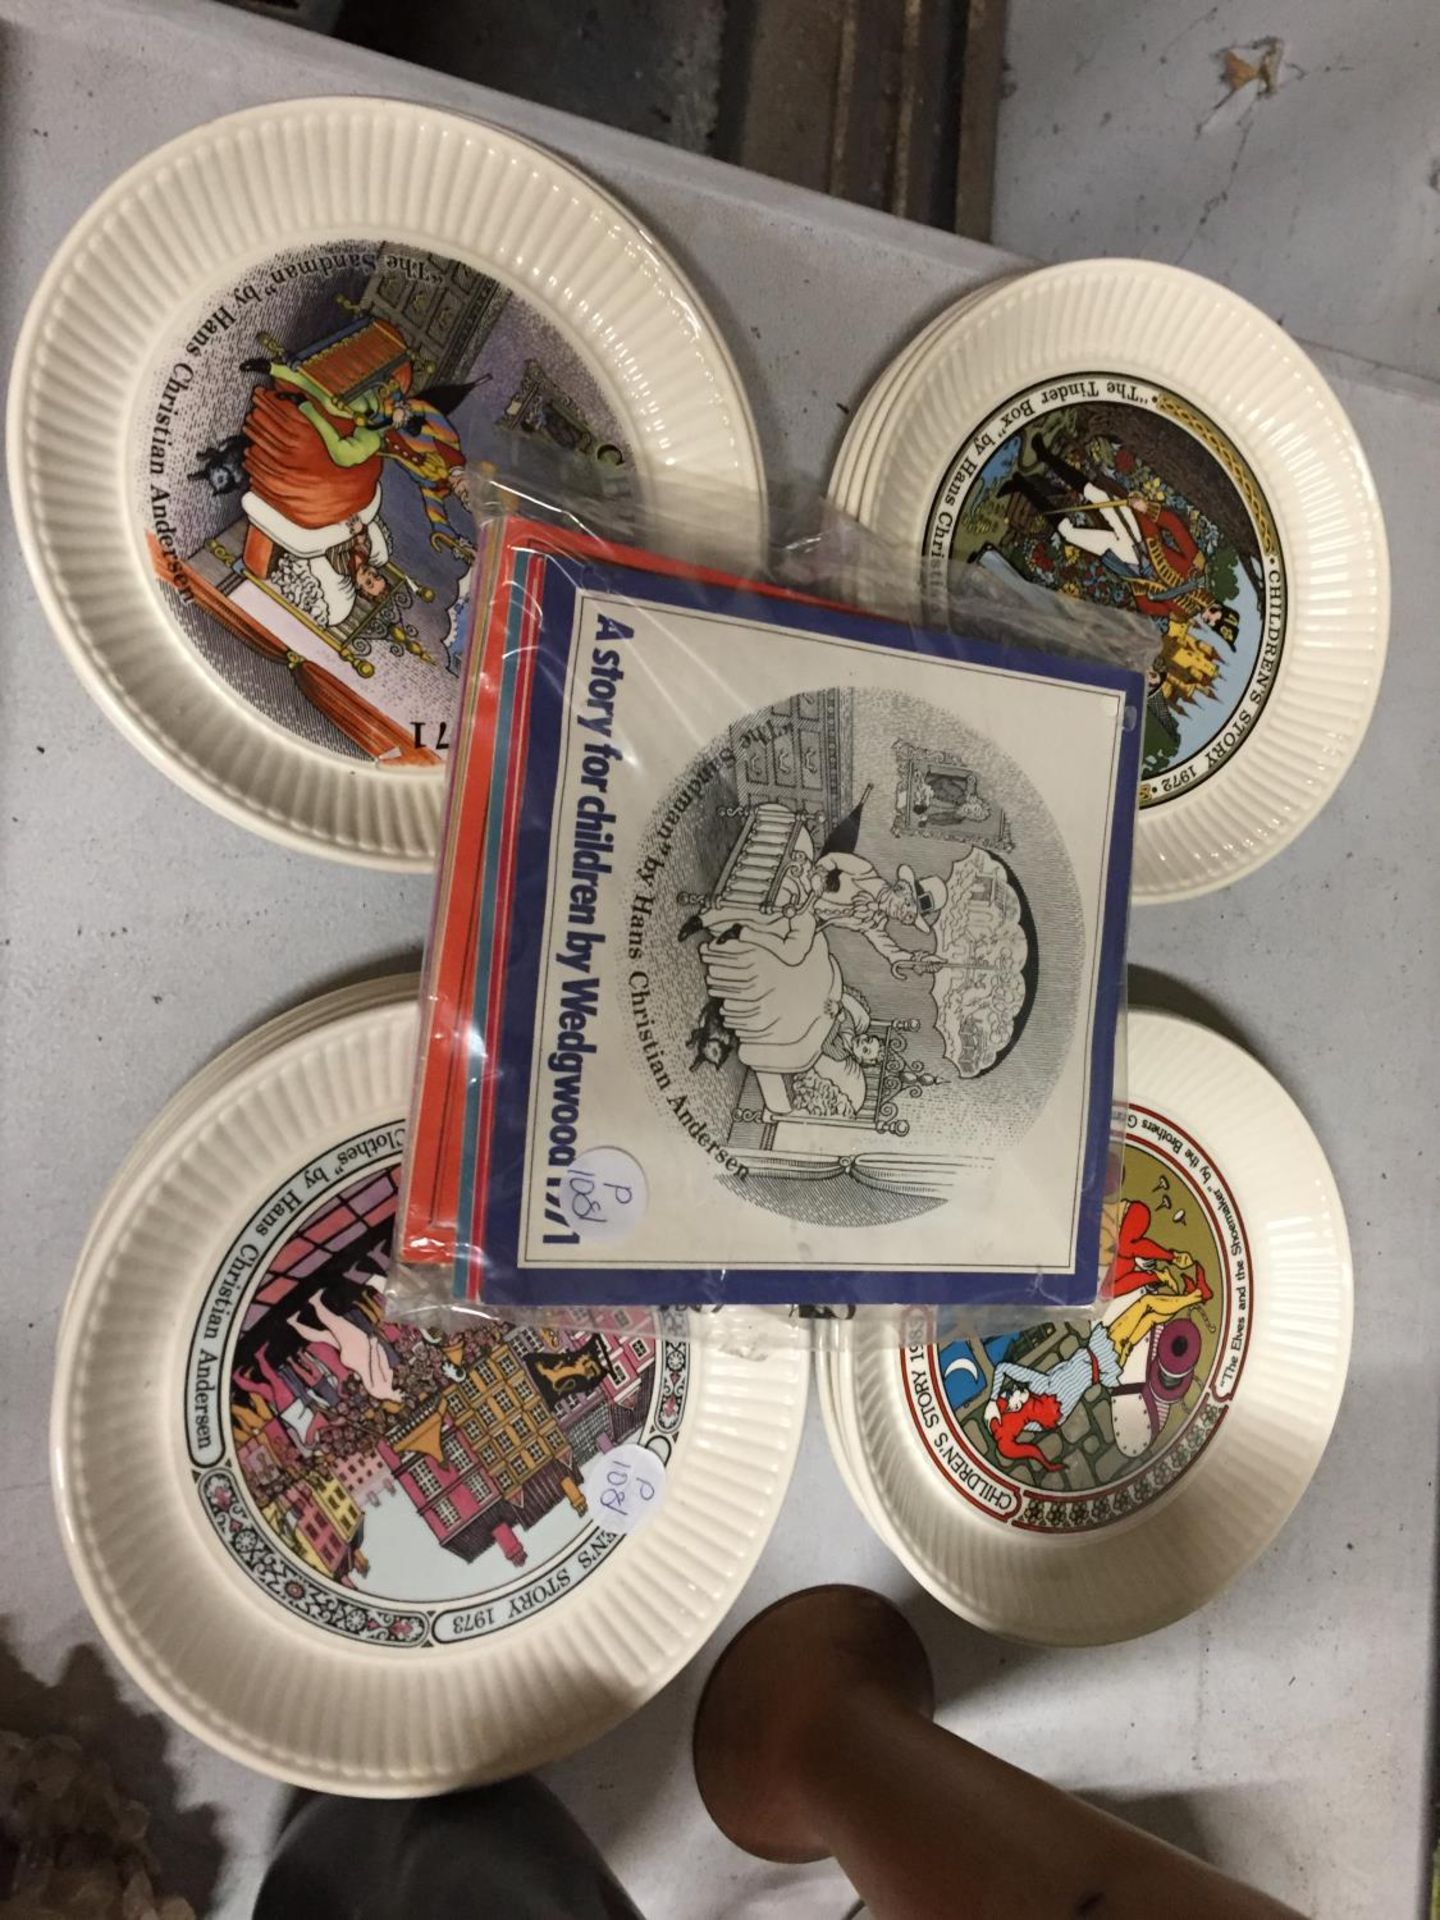 A COLLECTION OF SMALL WEDGWOOD CABINET PLATES 'CHILDREN'S STORIES' WITH STORY BOOKS PLUS A - Image 2 of 5